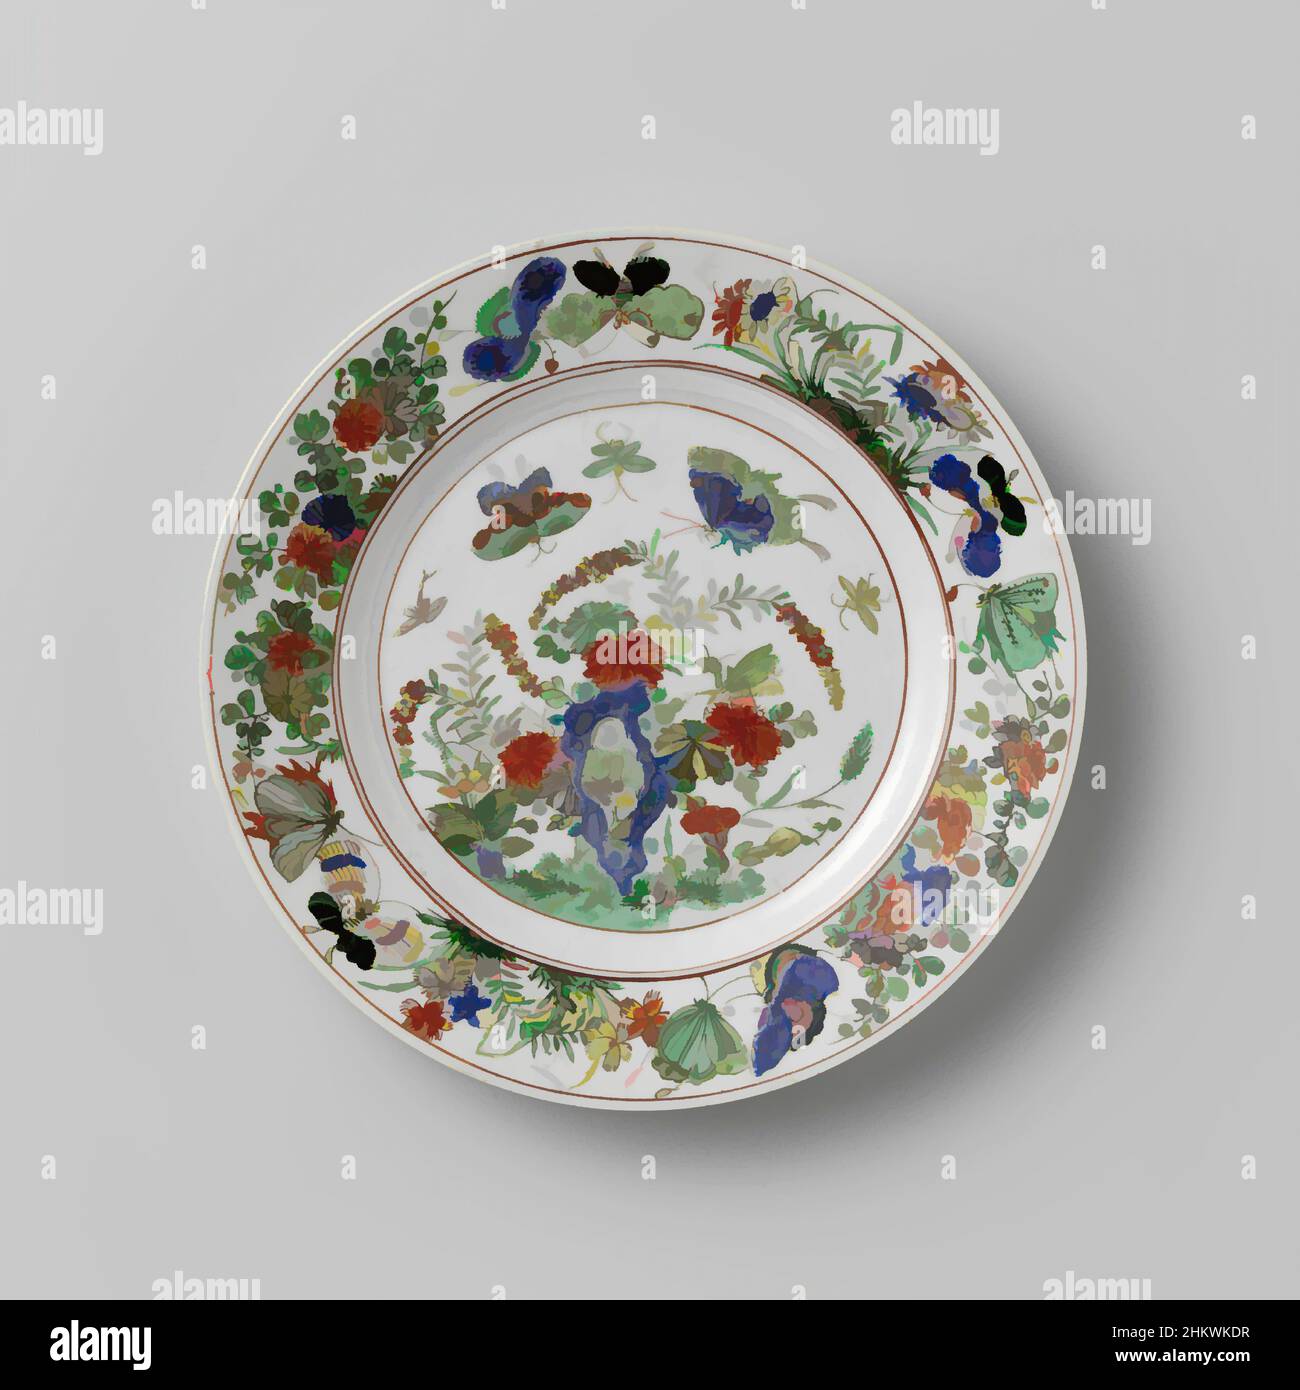 Art inspired by Plate with rock, butterflies and flowering plants, Plate of porcelain, painted in underglaze blue and on the glaze blue, red, green, yellow, eggplant and black. On the flat, butterflies and flowering plants near a rock; the rim with four flower groups (chrysanthemum, Classic works modernized by Artotop with a splash of modernity. Shapes, color and value, eye-catching visual impact on art. Emotions through freedom of artworks in a contemporary way. A timeless message pursuing a wildly creative new direction. Artists turning to the digital medium and creating the Artotop NFT Stock Photo